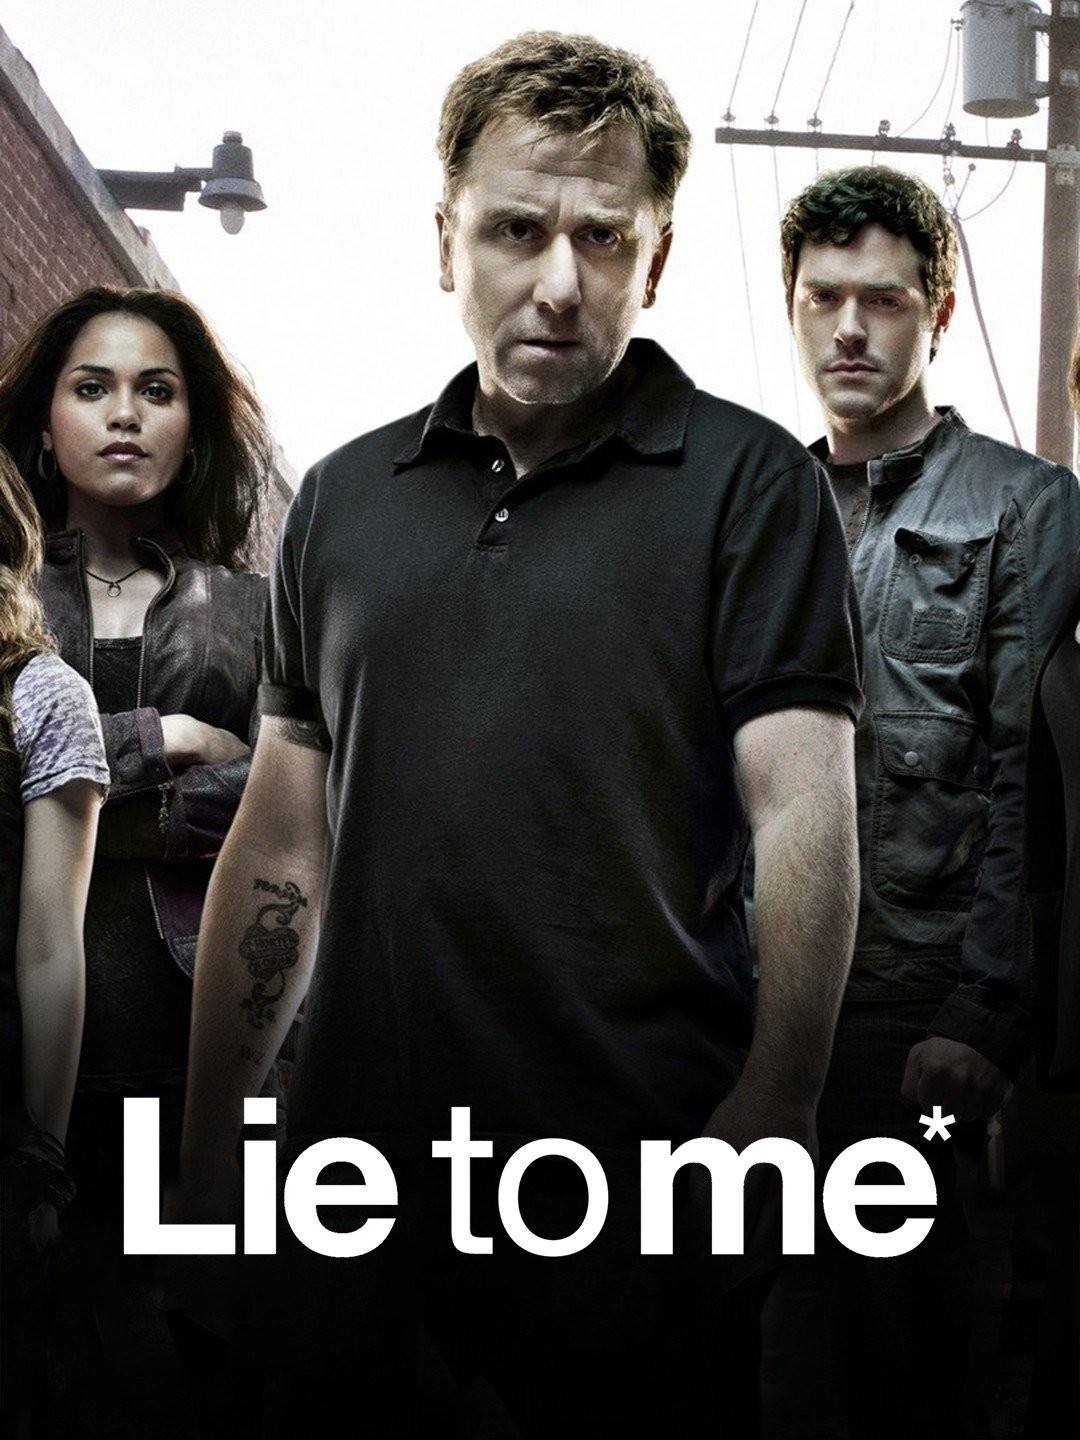 cath hudson recommends lie to me full movie pic